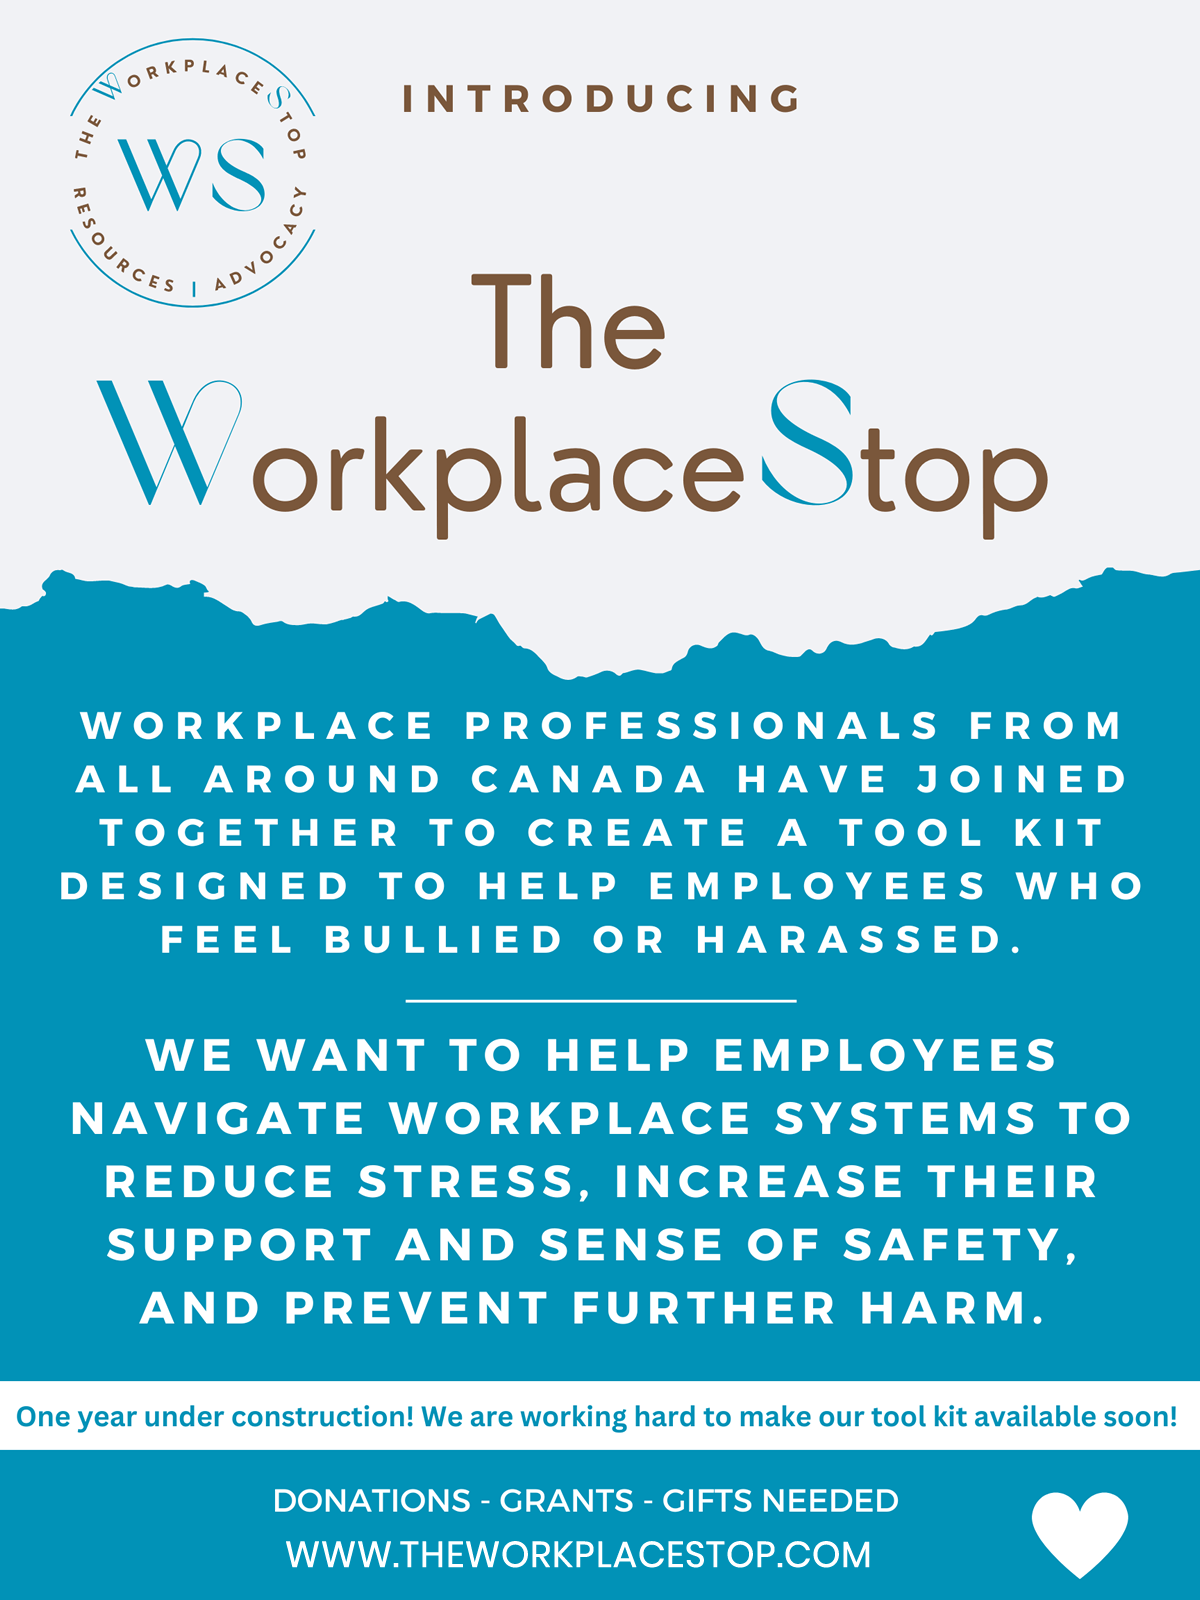 The WorkplaceStop, resource for bullied or harassed employees